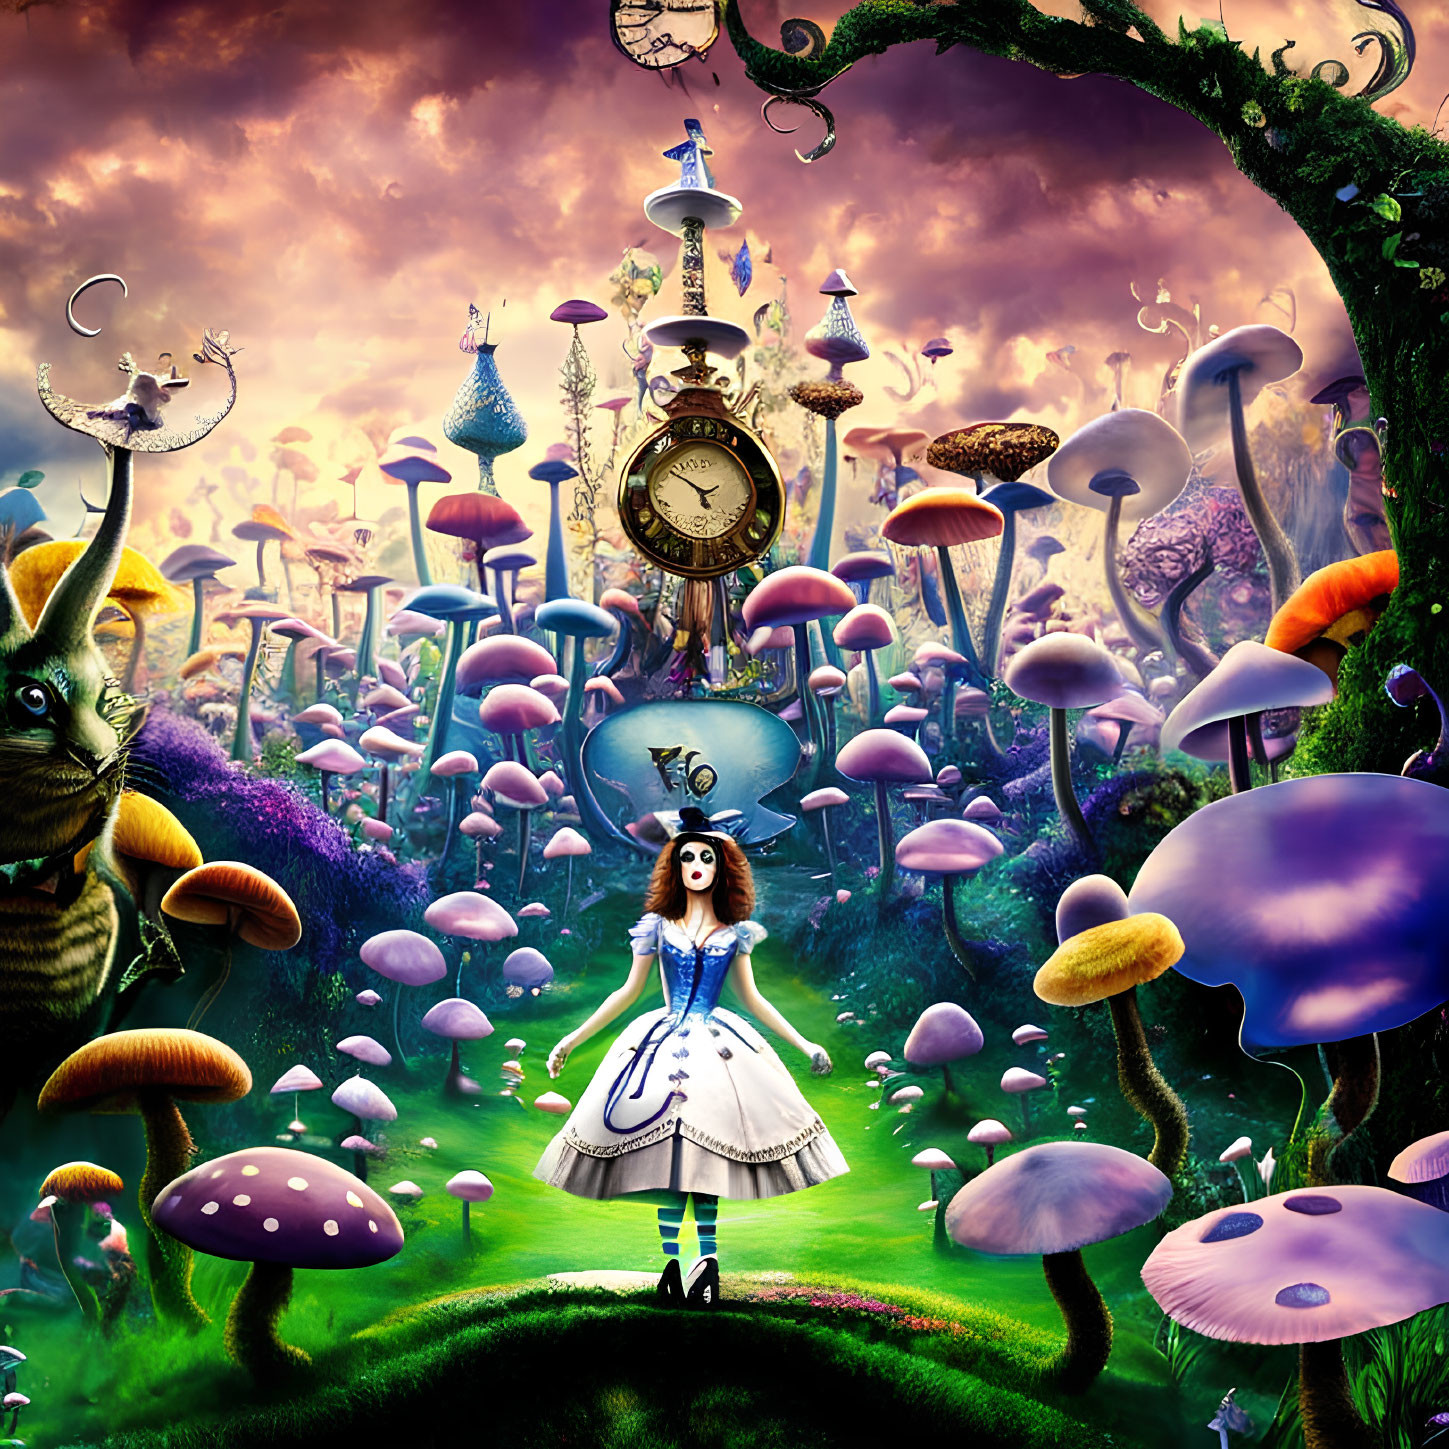 Vibrant surreal landscape with oversized mushrooms and floating clocks.